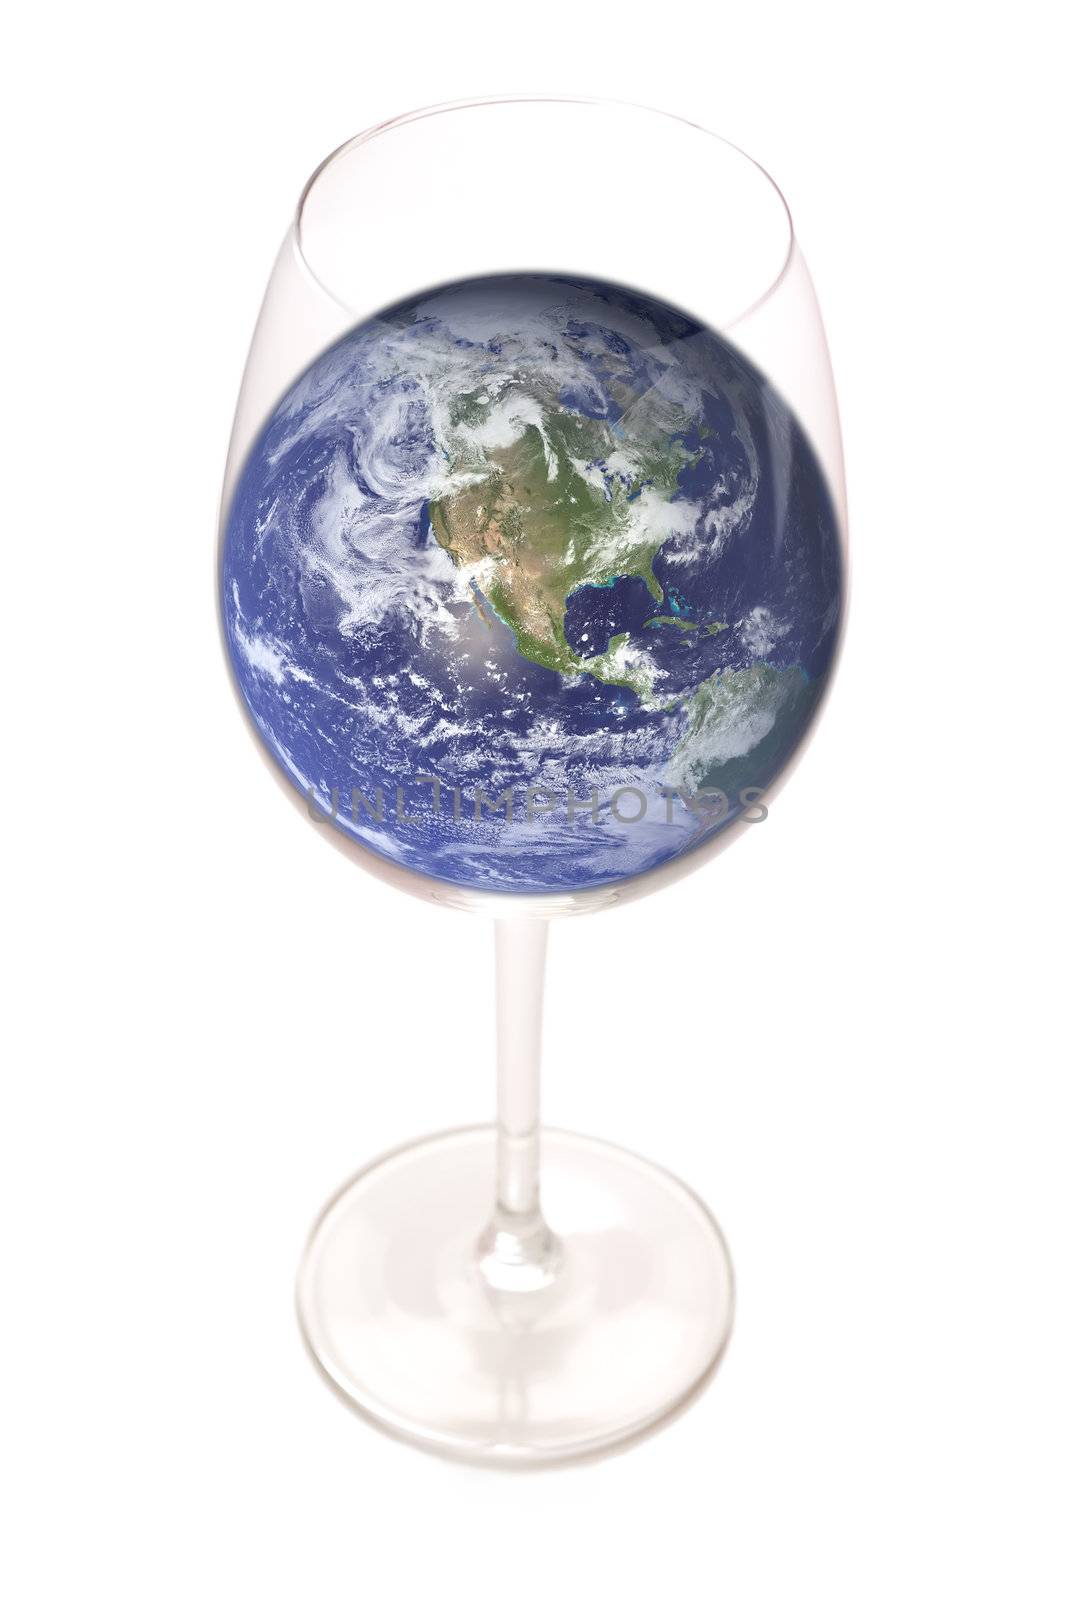 Conceptual image of planet Earth inside a Glass